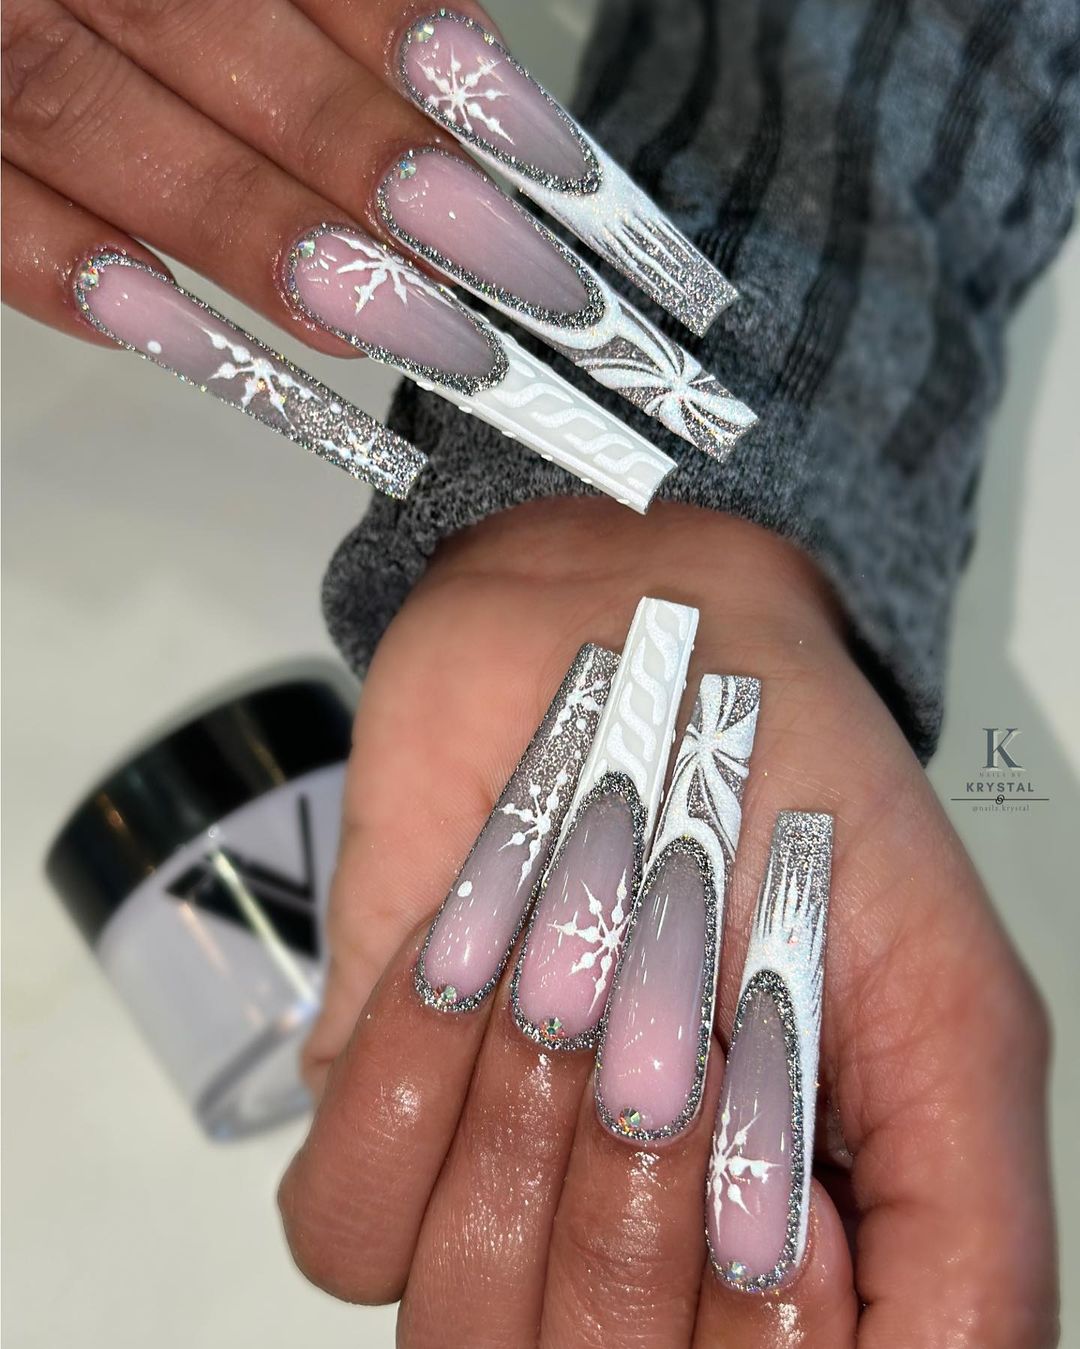 Pink and Silver Winter Nails